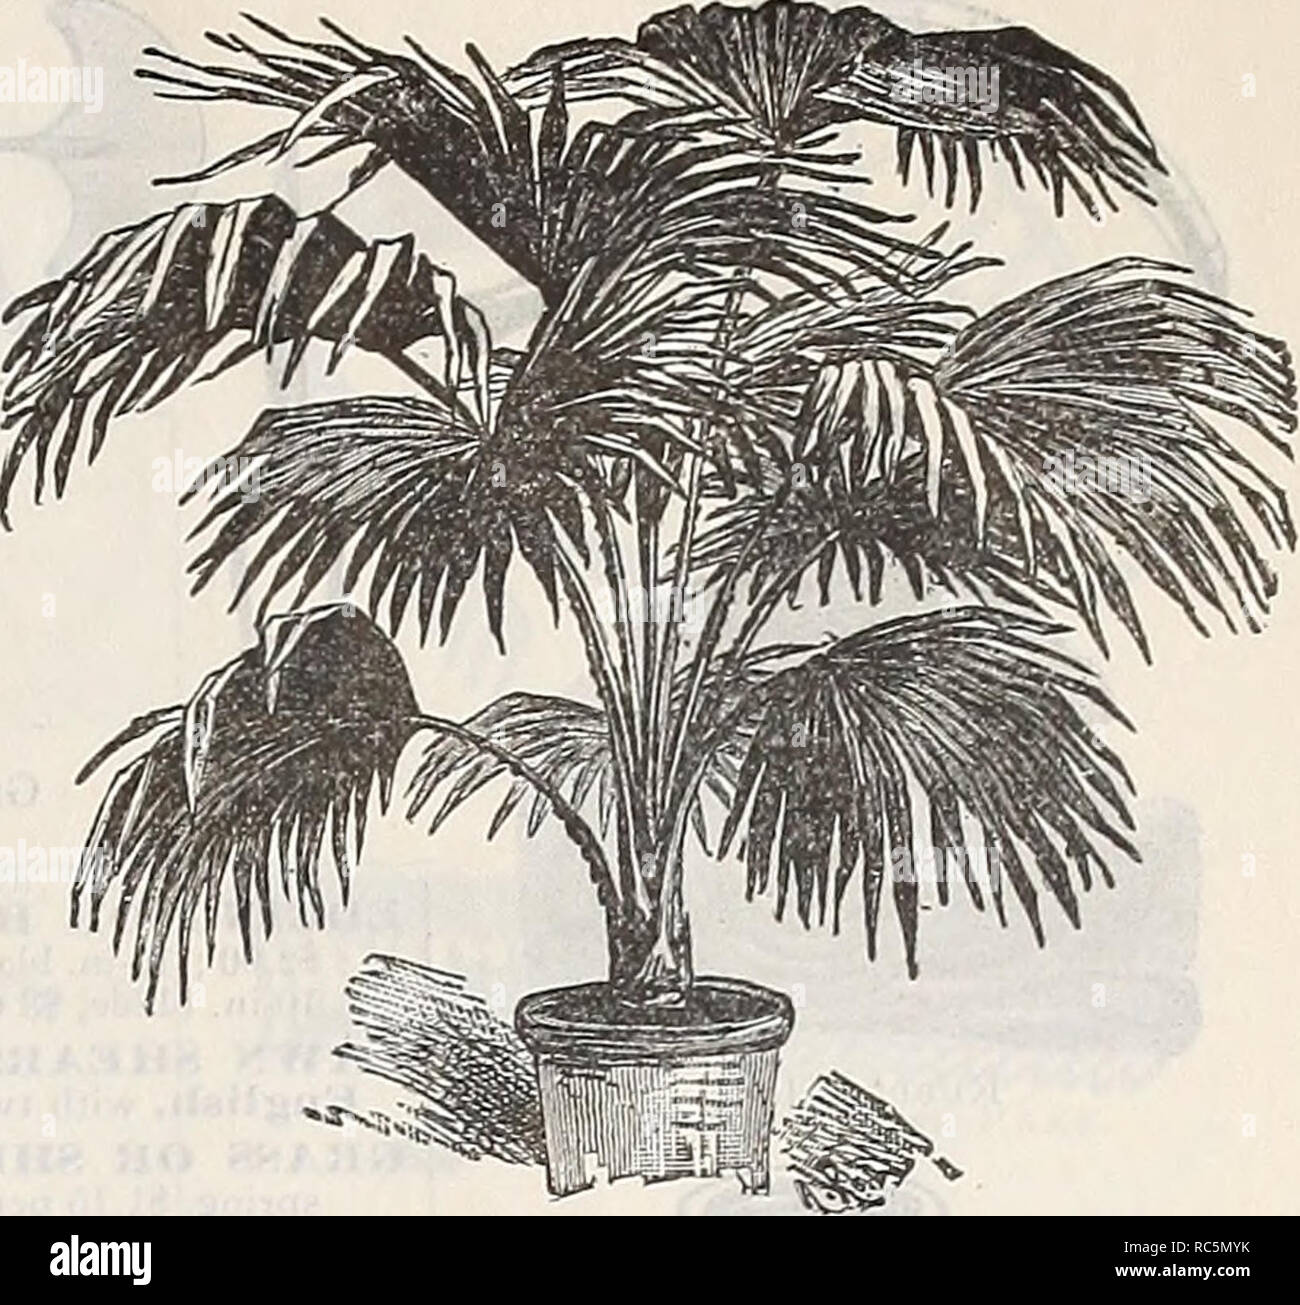 . Dreer's mid-summer catalogue 1900 : pot grown strawberry plants seasonable plants seeds &amp; sundries. Flowers Seeds Catalogs; Fruit Seeds Catalogs; Vegetables Seeds Catalogs; Nurseries (Horticulture) Catalogs. DREER'S MID-SUMMER CATALOGUE. 21 LATANIA BORBONICA (Chinese Fan Palm). This popular variety is too well known to require description. We grow them in immense quantities. 3-in. pots, 4 to 5 leaves, 12 in. high $ 25 each 4 &quot; 5 to 6 &quot; 15 &quot; 50 &quot; 5 &quot; 6 &quot; 15 &quot; 1 00 &quot; 6 &quot; 6 &quot; 20 &quot; 1 50 &quot; 7 &quot; 6 to 7 &quot; 24 &quot; 2 50 &quot; Stock Photo